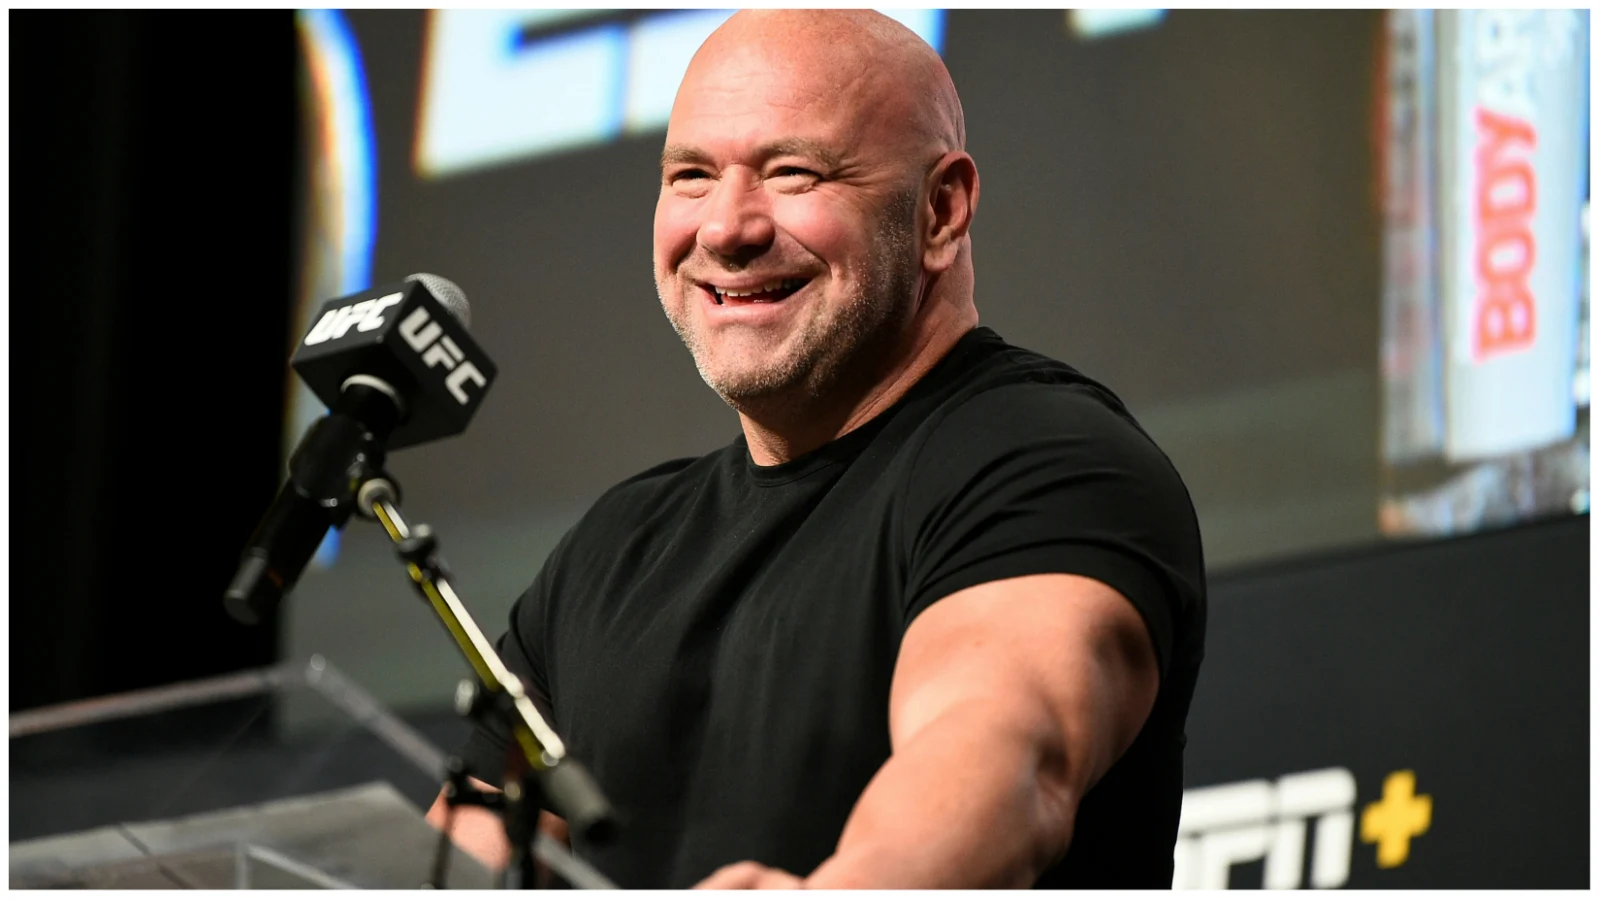 Dana White Age, Height, Net Worth, Wife, Social Media, Son and Biography